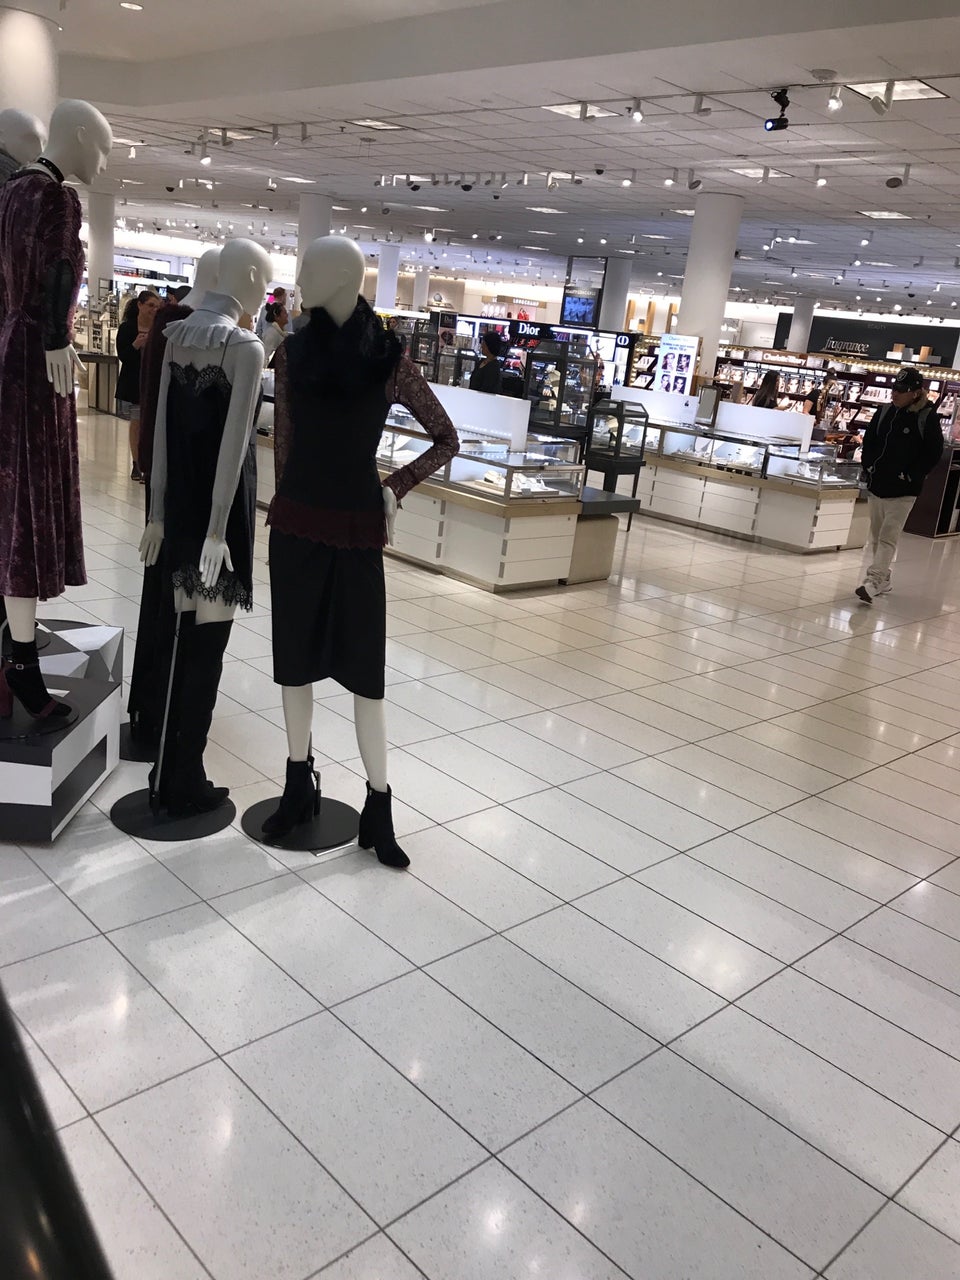 Nordstrom Valley Fair  Clothing Store in San Jose